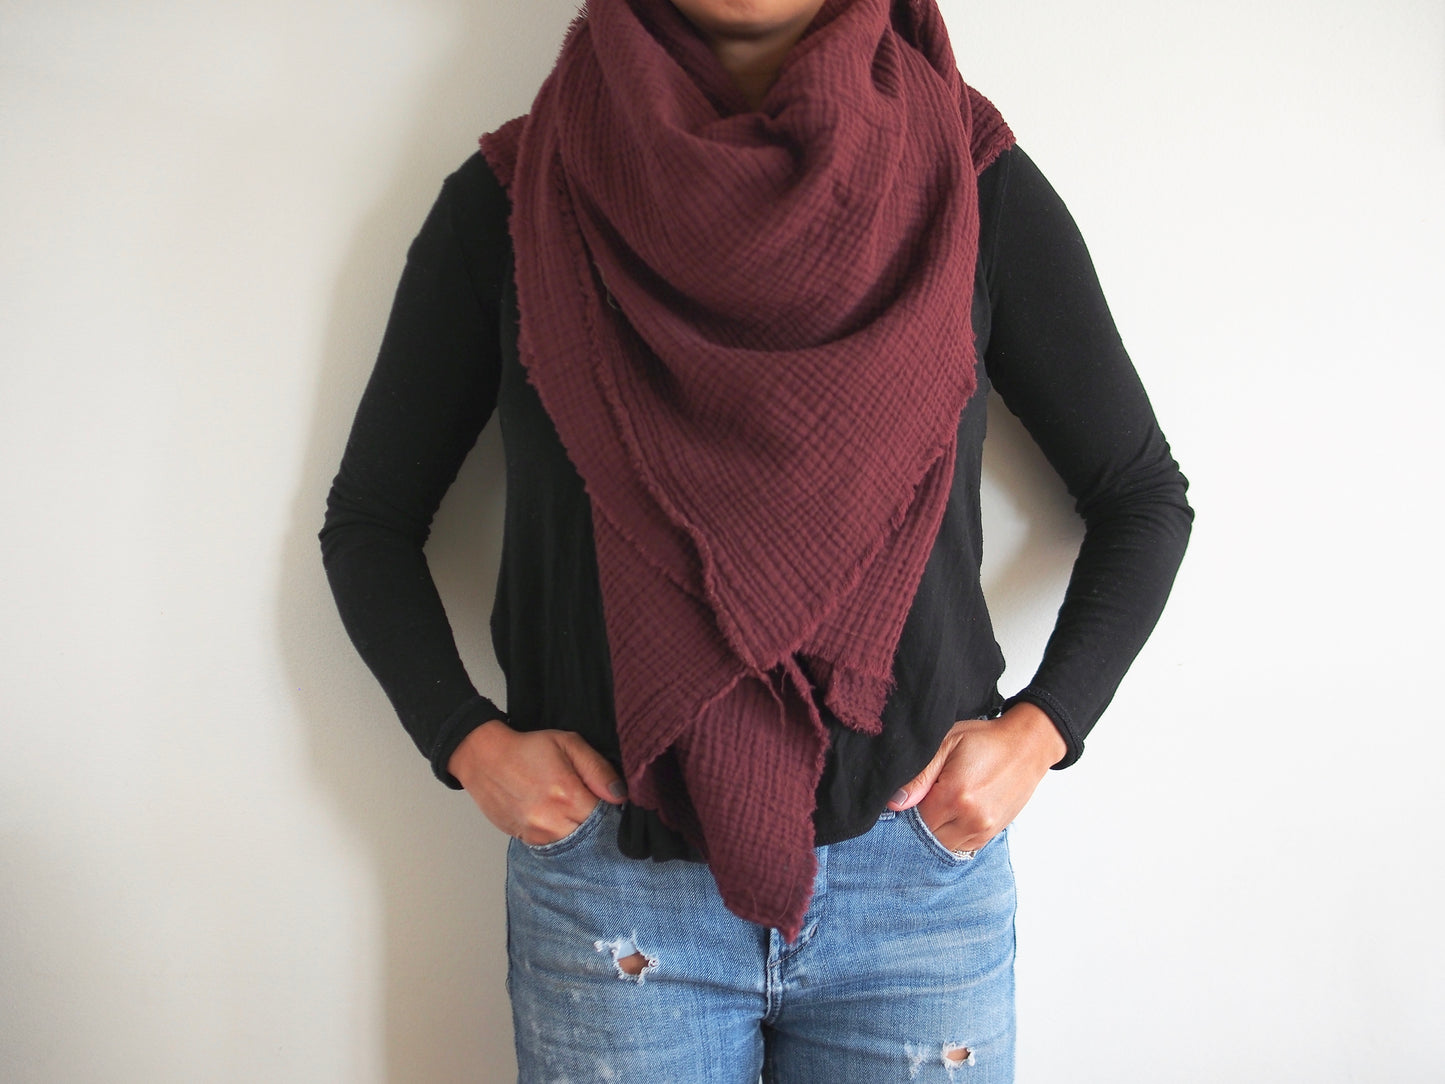 SHOP for a Cause! Maroon Gauze Blanket Scarf